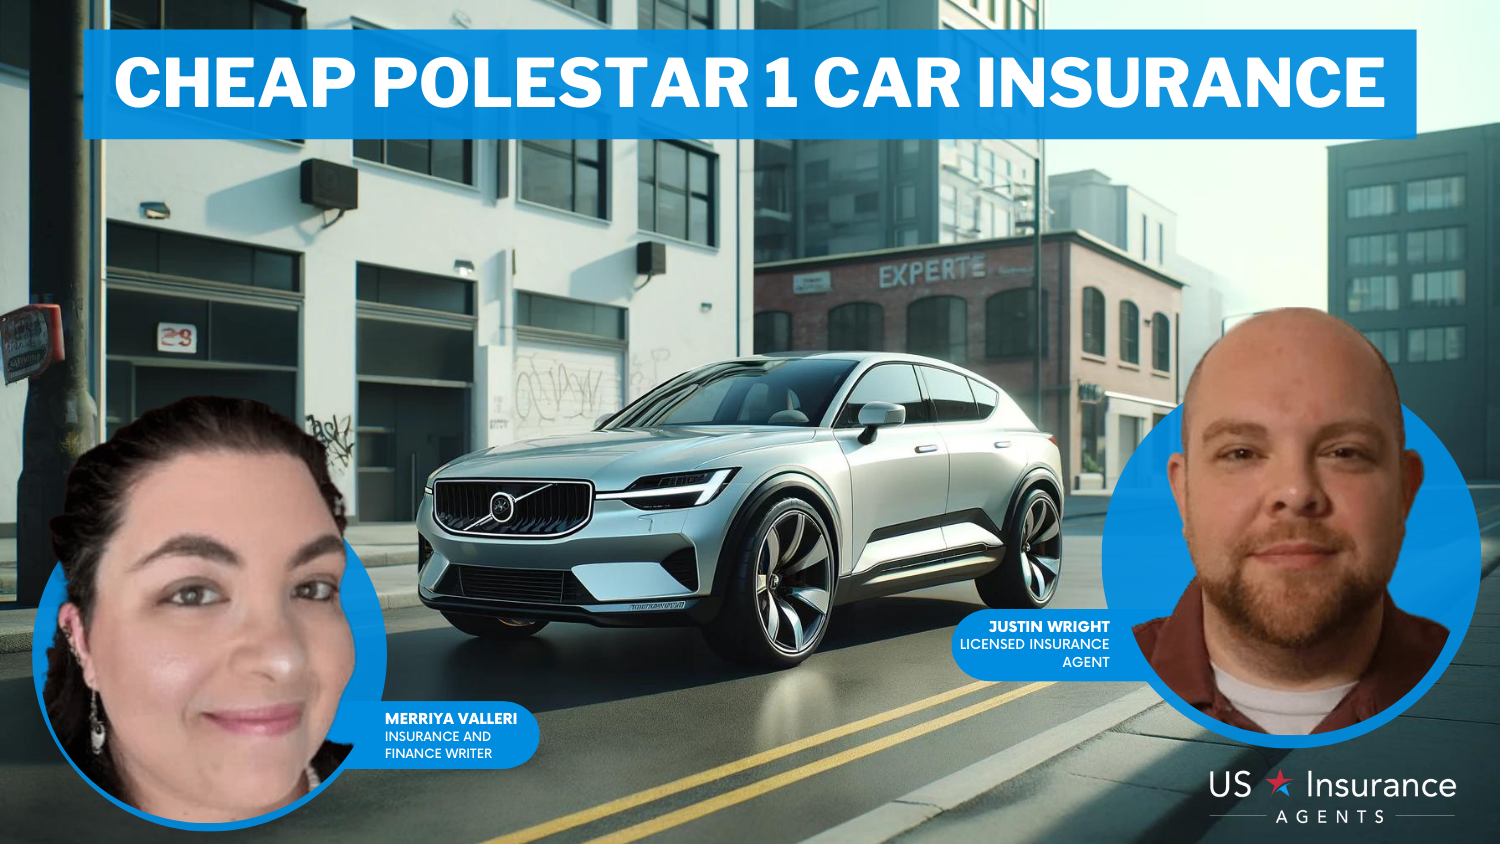 Cheap Polestar 1 Car Insurance: State Farm, Auto-Owners, and Erie